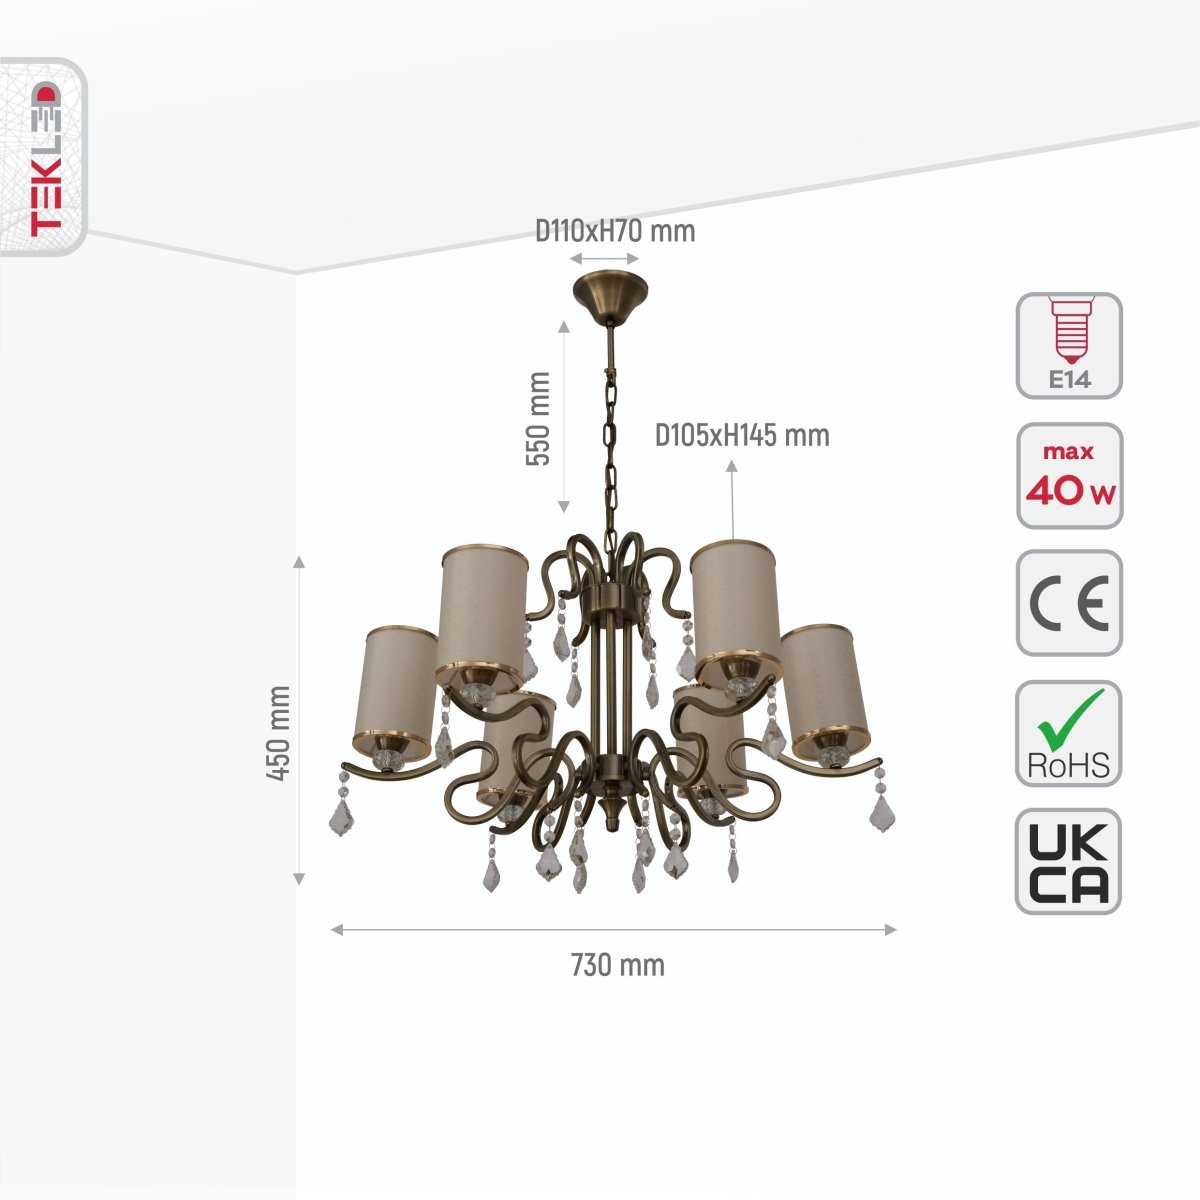 Size and specs of Cream Shade Antique Brass Metal 6 Arm Chandelier with Pendeloque Crystals 6xE14 | TEKLED 158-17826